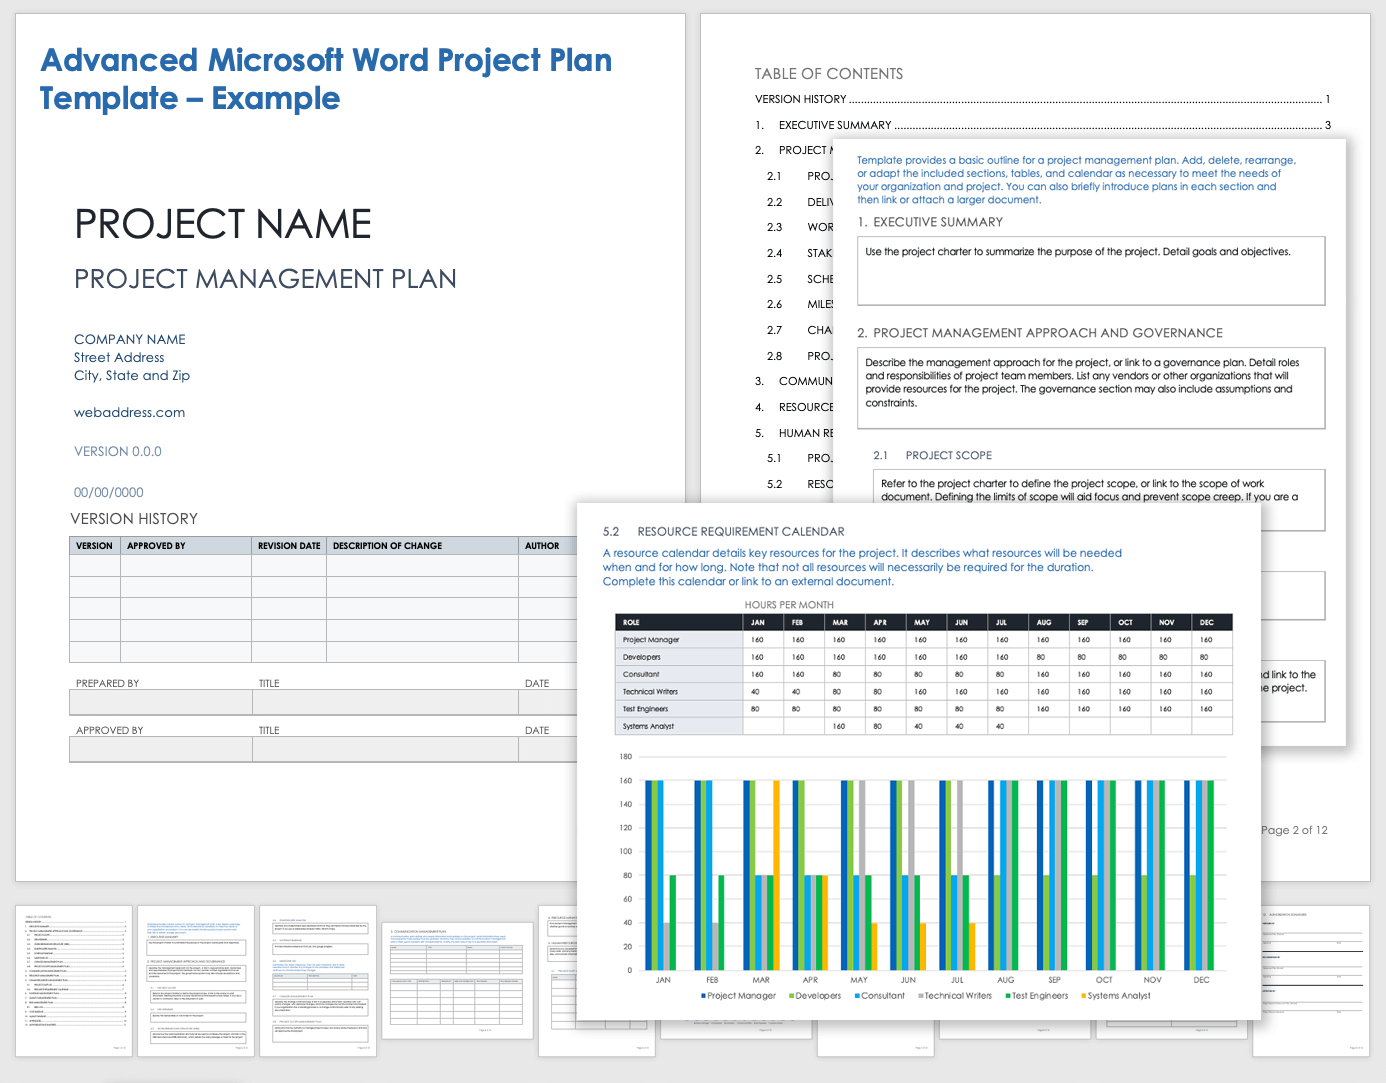 Advanced Project Plan Template With Example Data for Microsoft Word